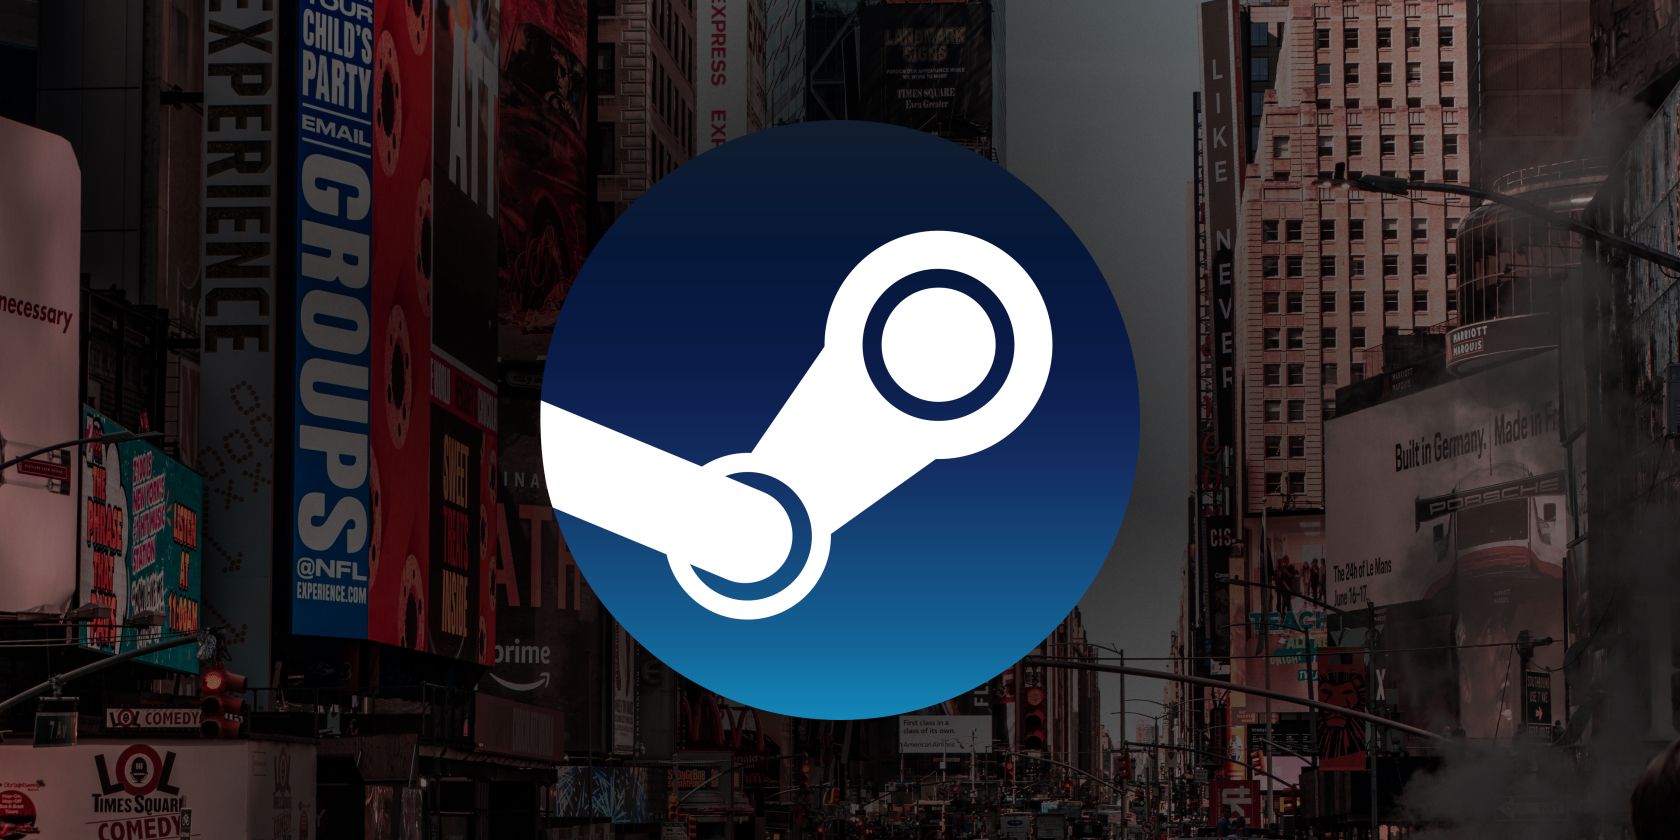 How to Stop Steam Pop-Up Ads on Launch